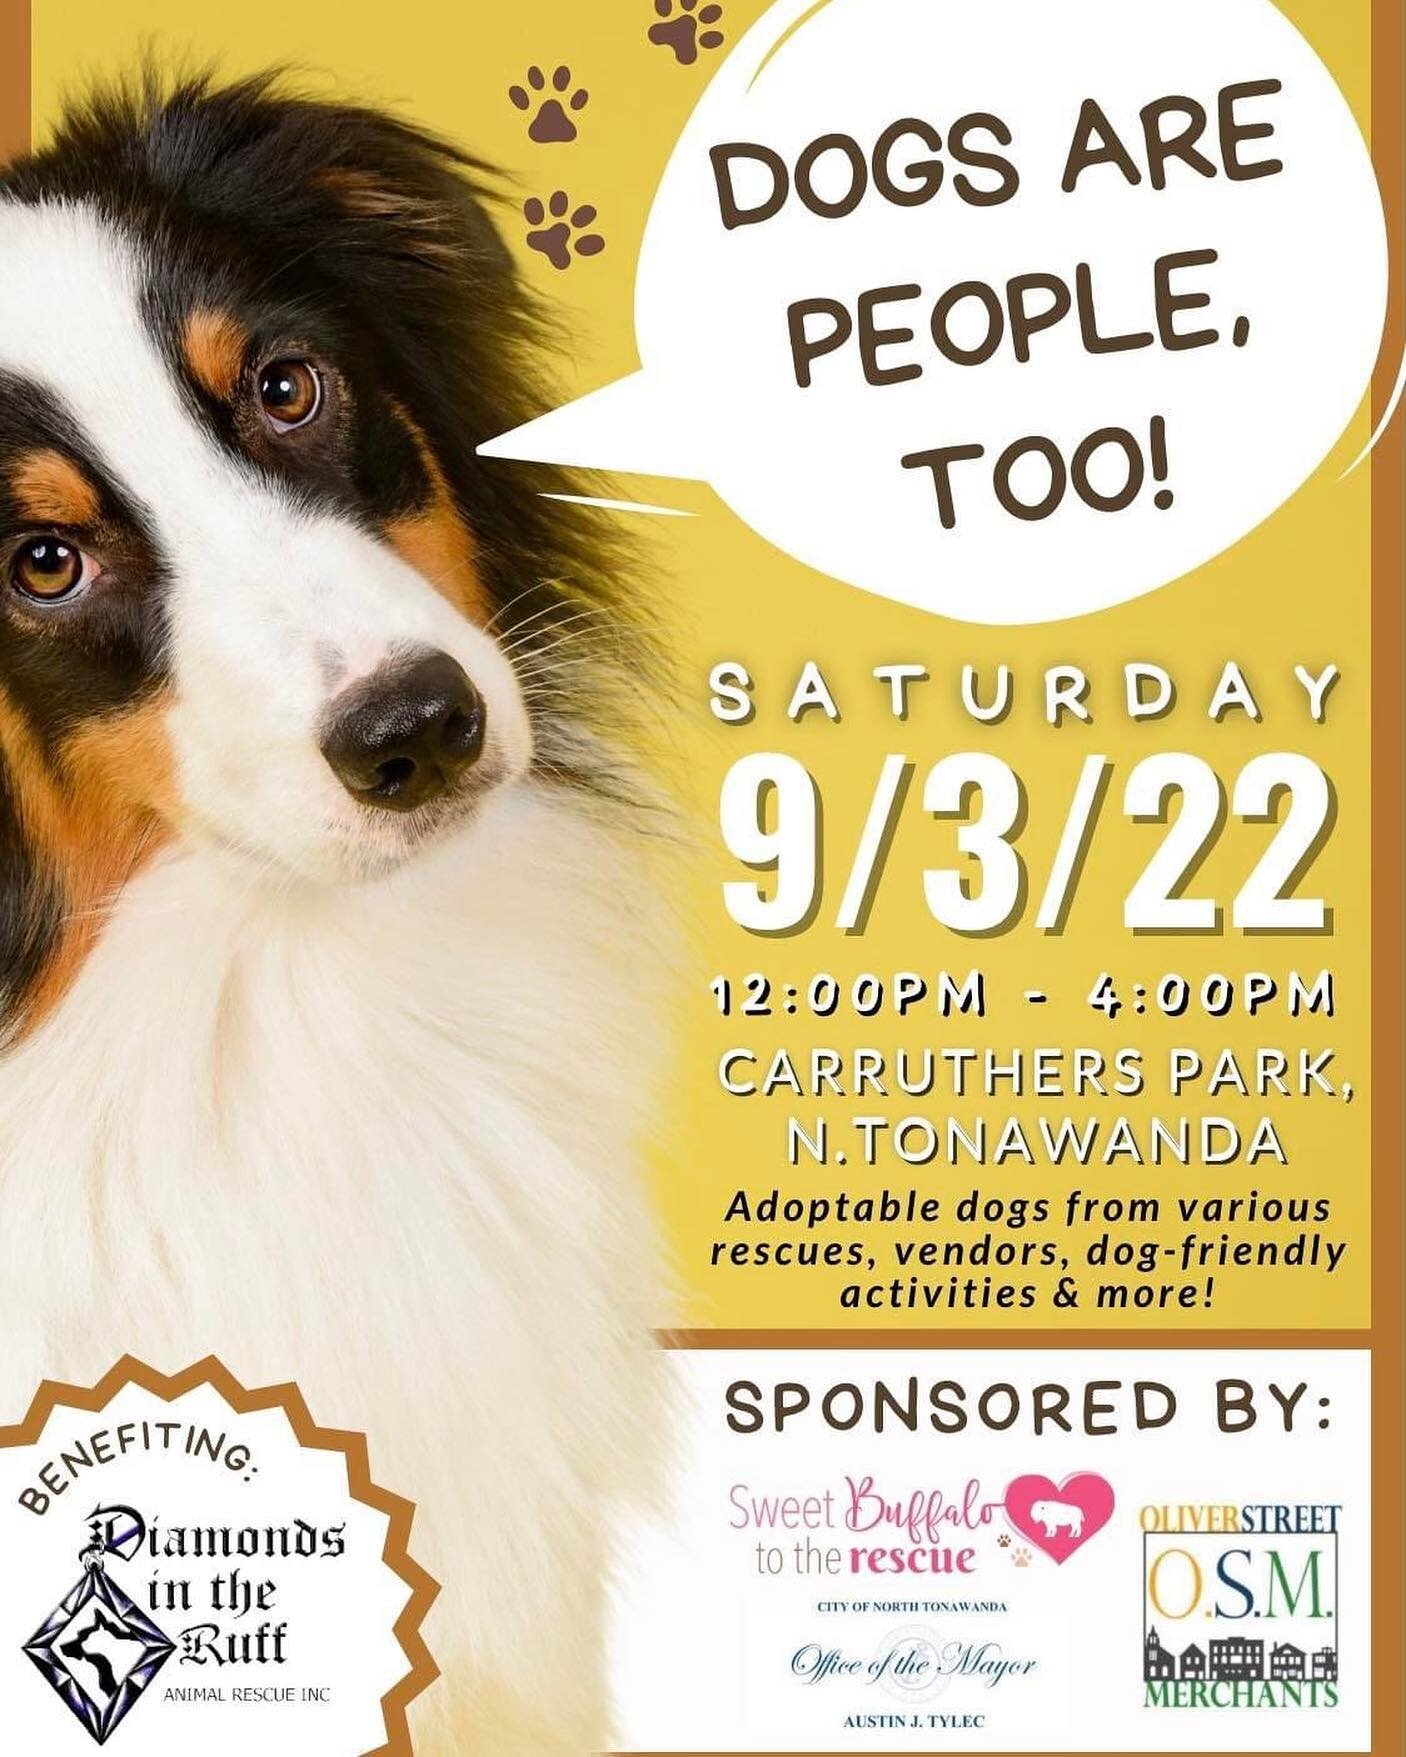 COME VISIT US ON SATURDAY
.
Last year was SO. MUCH. FUN. at Dogs are People, Too, and we&rsquo;re so excited to be invited back. Bring your best buddy, get them a new fall collar, partake in all the super fun activities offered, and don&rsquo;t forge